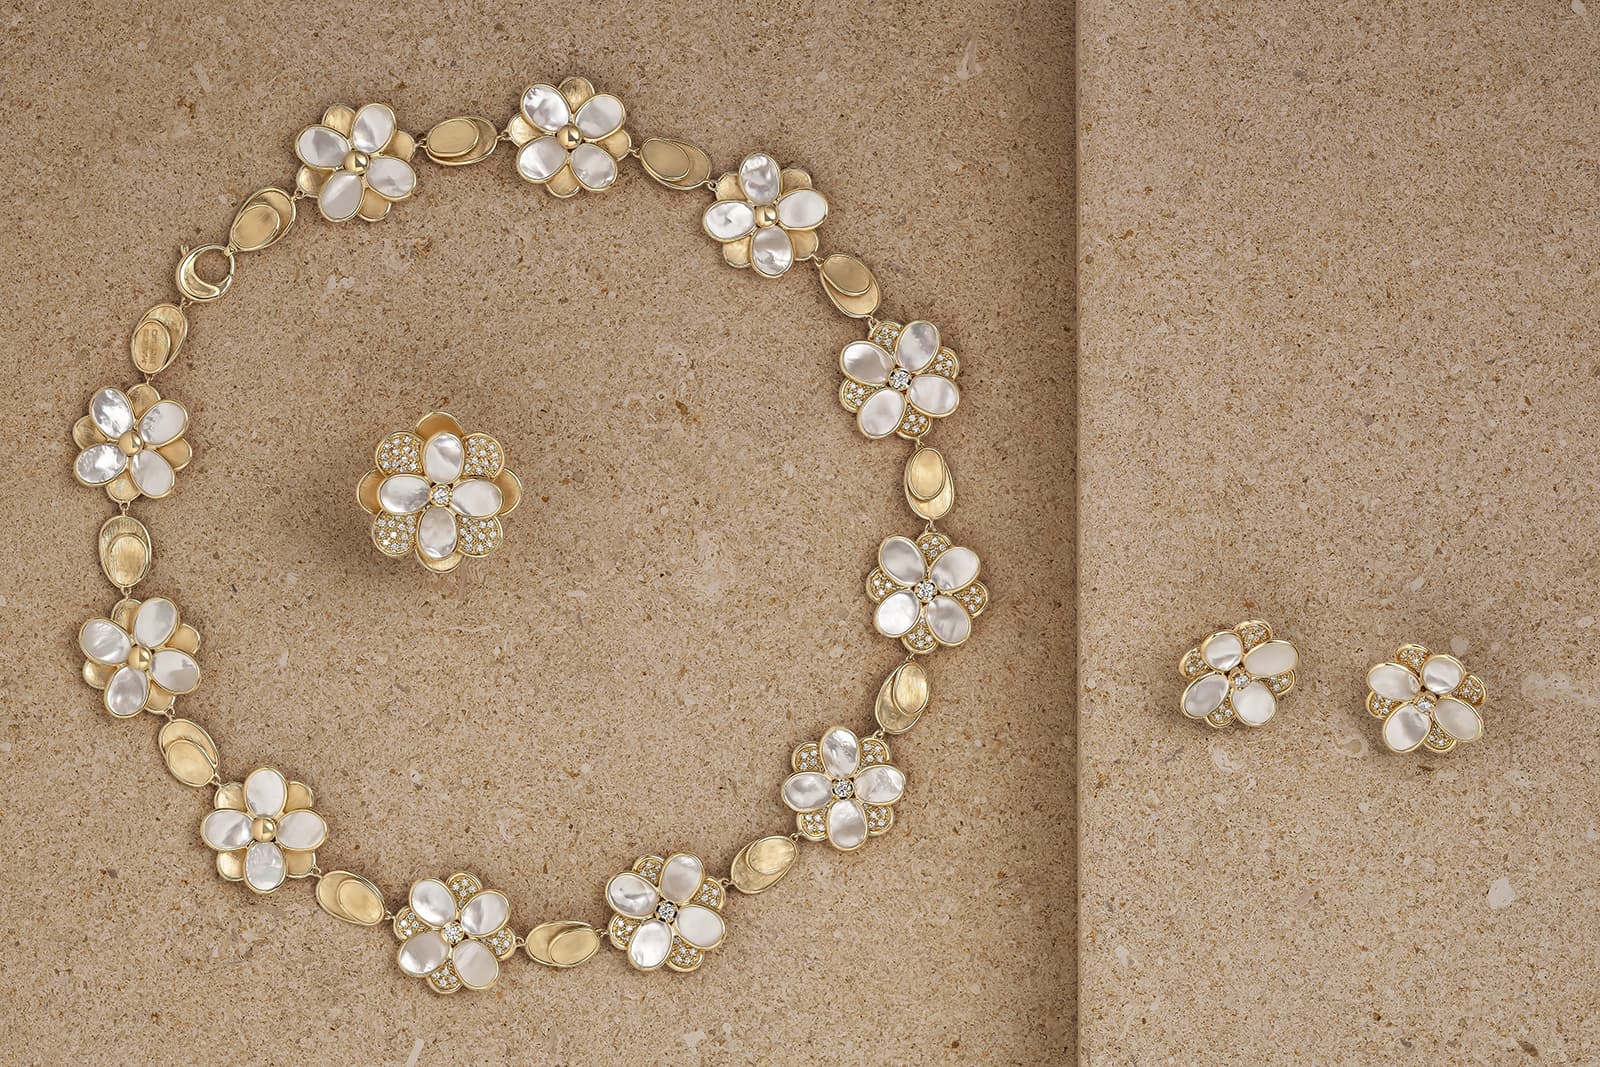 Marco Bicego Petali set with mother of pearl and diamonds in 18k yellow gold from the ALTA High Jewellery collection